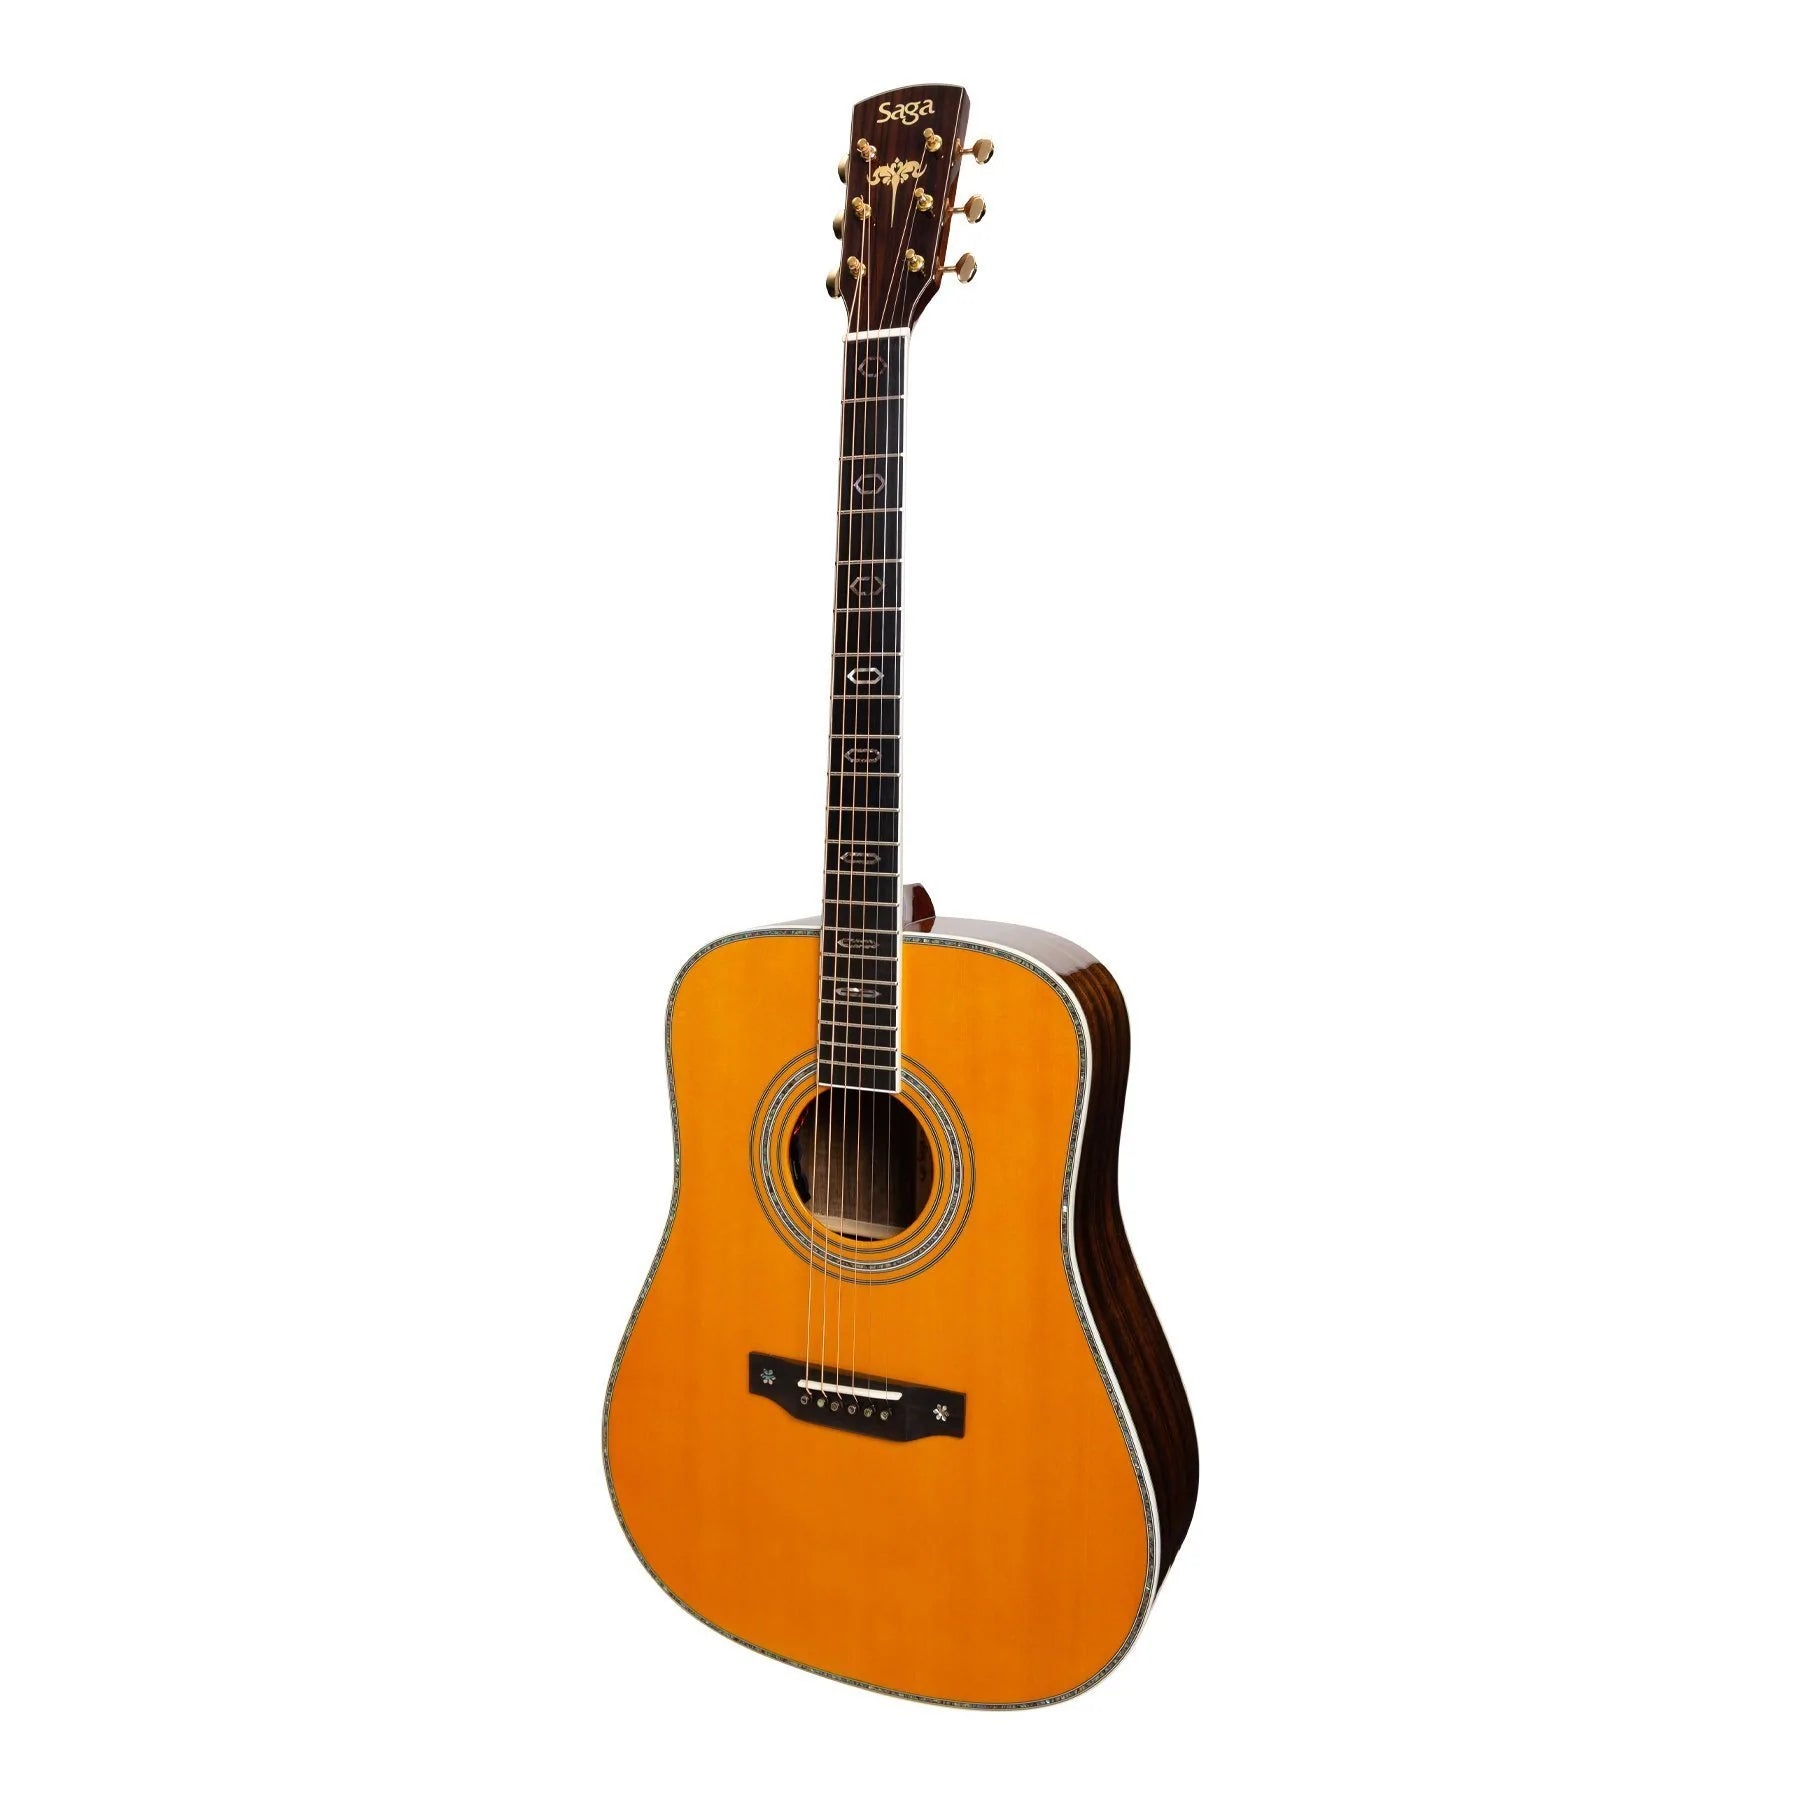 Saga SL68 All-Solid Spruce Top Okoume Back & Sides Acoustic-Electric Dreadnought Guitar | Natural Gloss